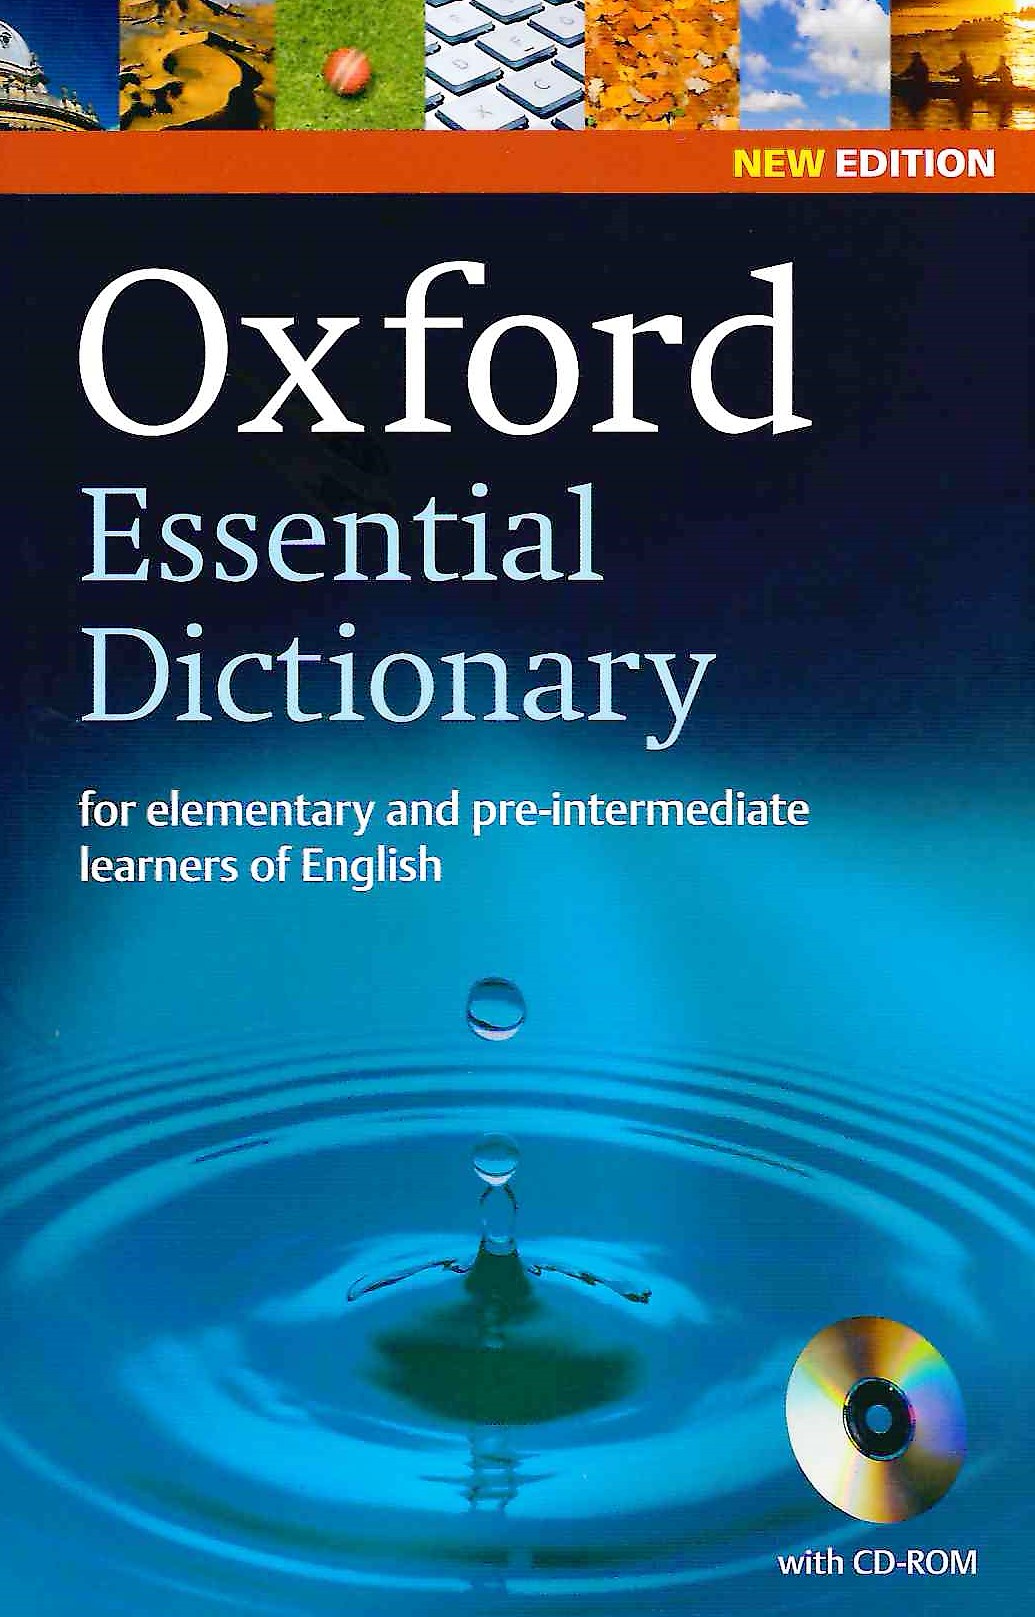 Oxford Essential Dictionary (New Edition) + CD-ROM